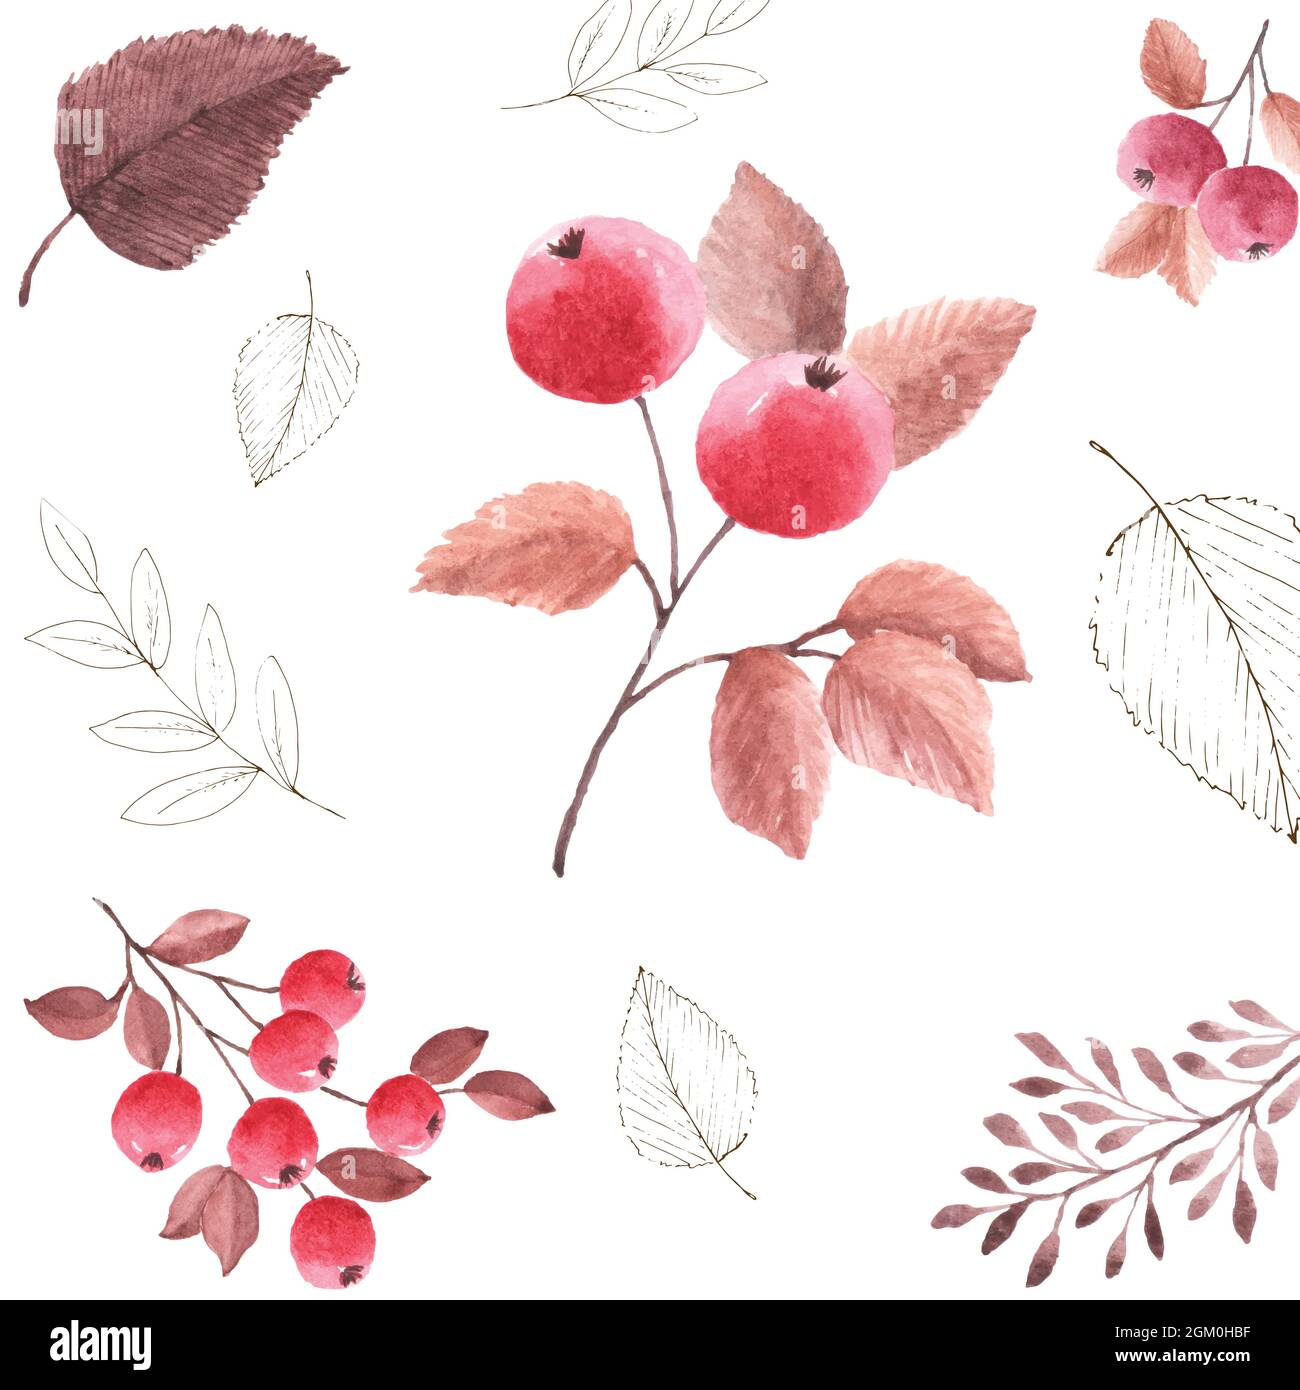 Watercolor seamless pattern autumn leaves on a white background. Watercolor hand-painted with rowan berries art design for decorative in the autumn fe Stock Vector